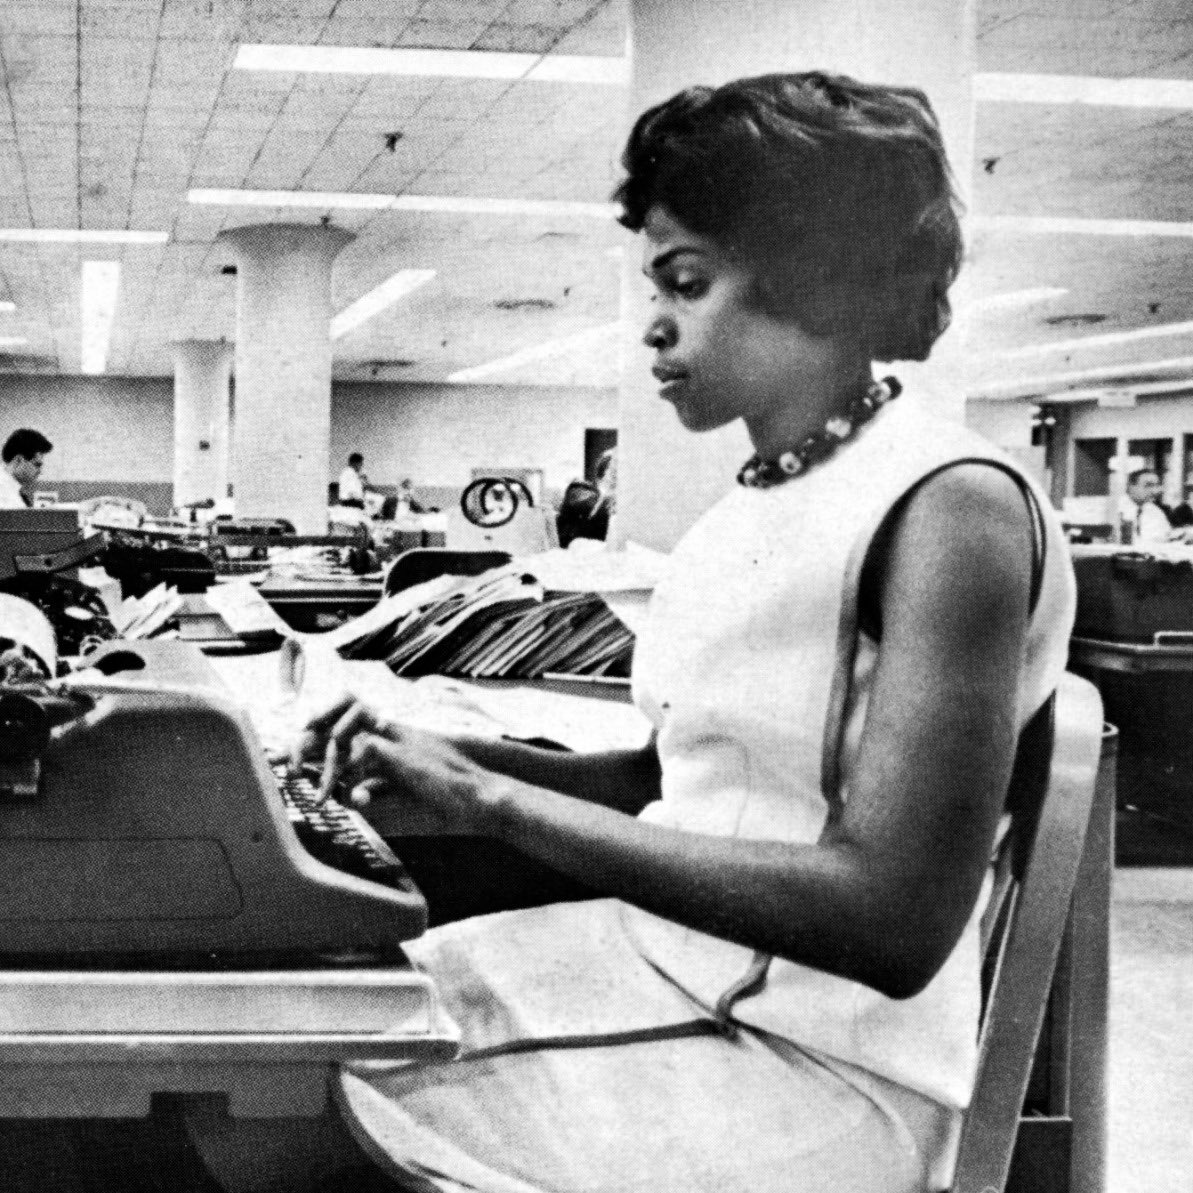 In 1961, I became the 1st Black woman hired at the @washingtonpost. The amount of racism & prejudice I dealt with would make most QUIT. I persevered. I’m excited to see young journalists push past fear to report news NOW! Silence doesn’t solve problems, action solves problems!